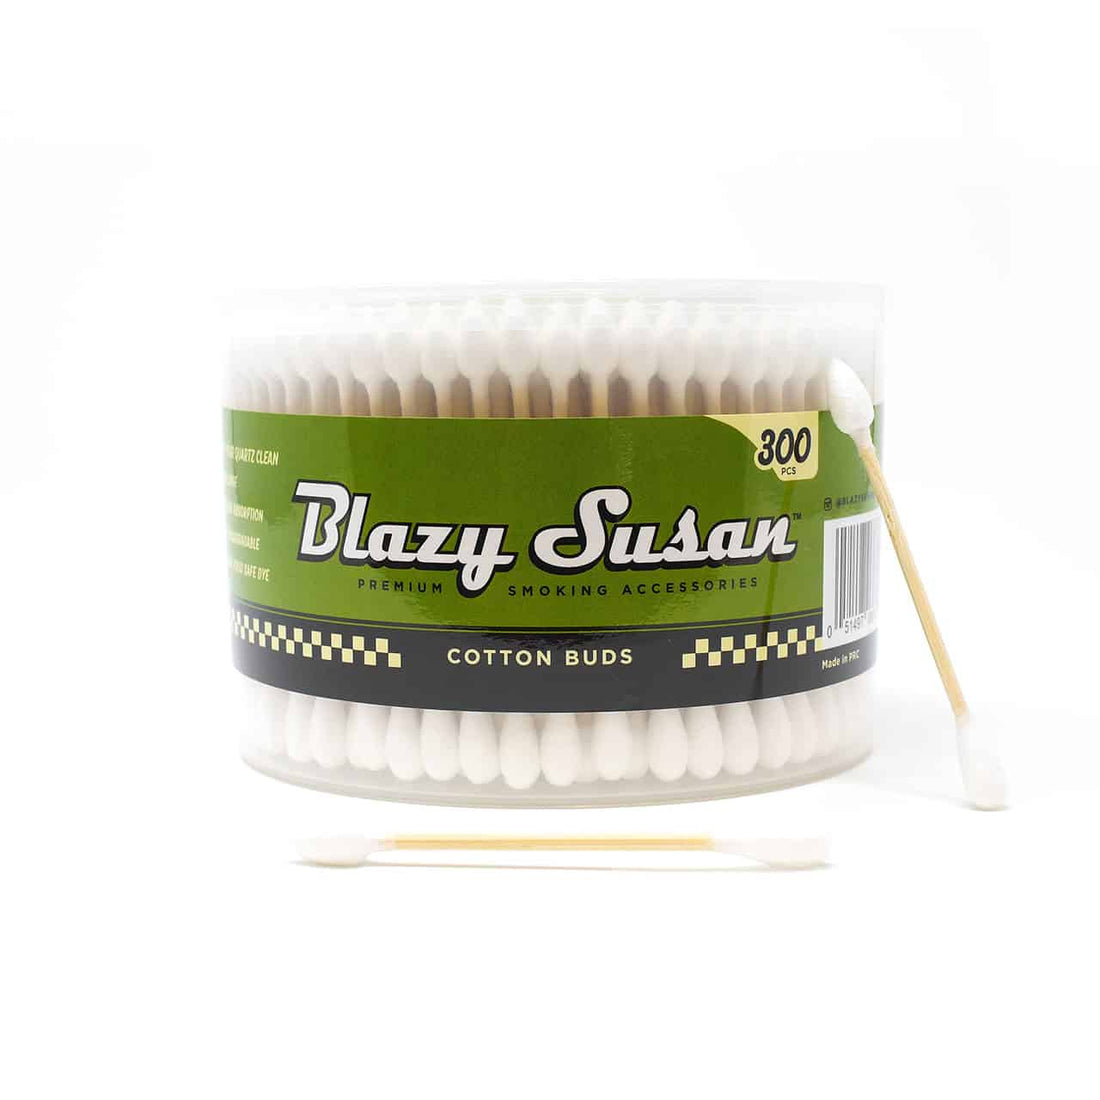 blazy susan cotton buds swabs bliss shop chicago